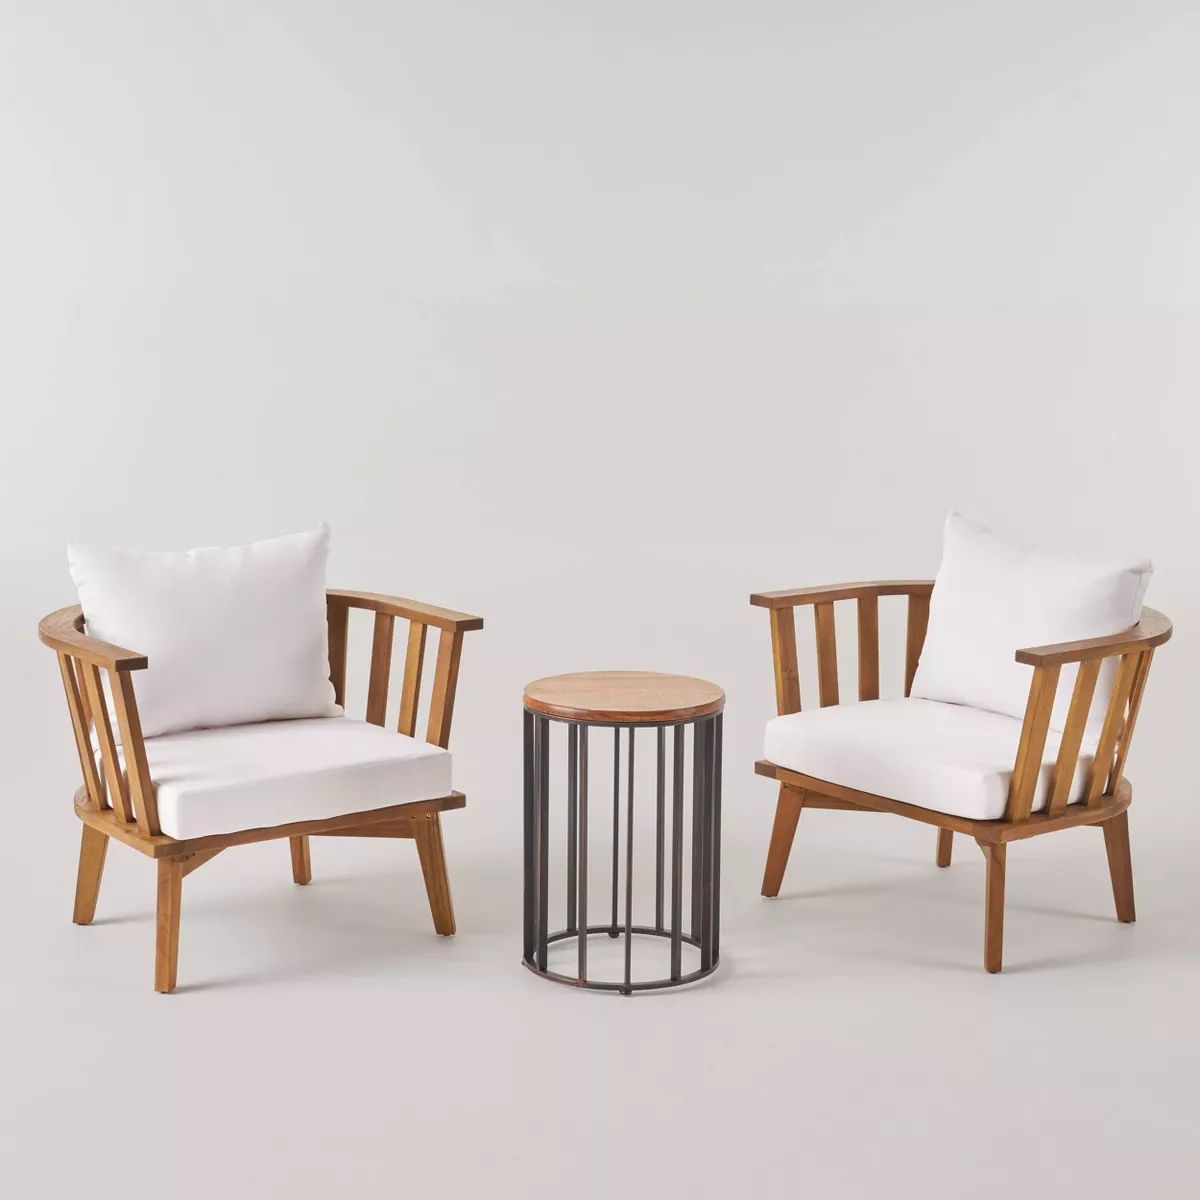 Horatio 3pc Acacia Wood Club Chairs & Side Table Set - Teak/White - Christopher Knight Home | Target